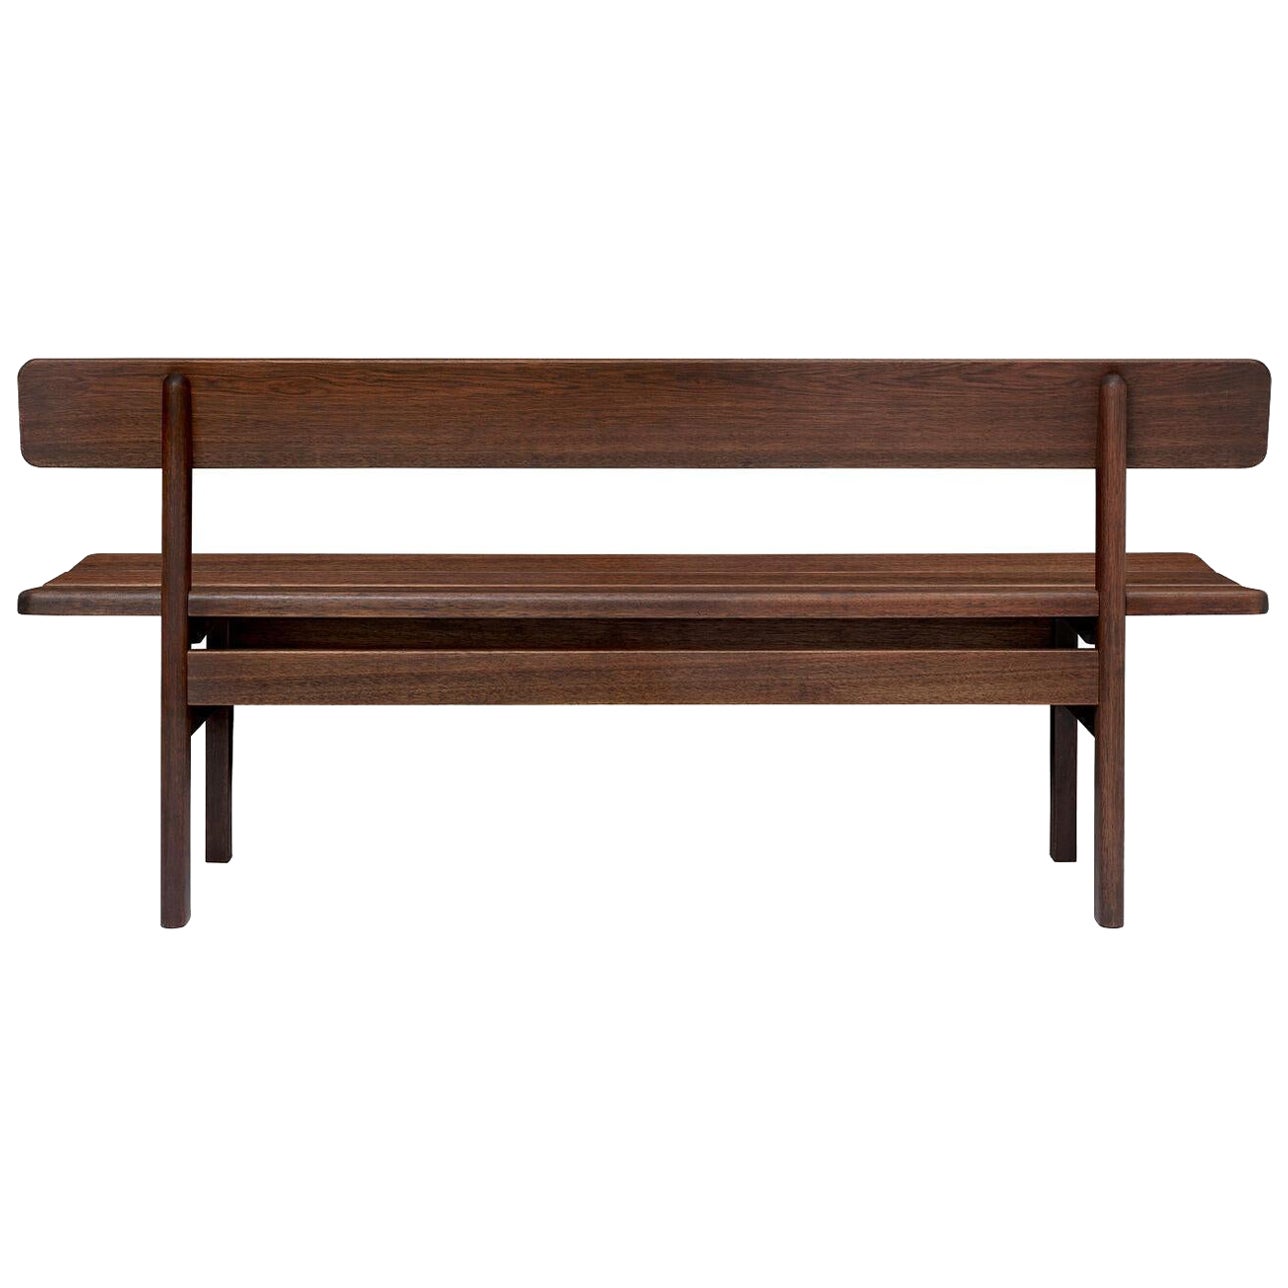 BM0699 Asserbo Bench with Back in Dark Oil Stained Eucalyptus Wood *Quickship*